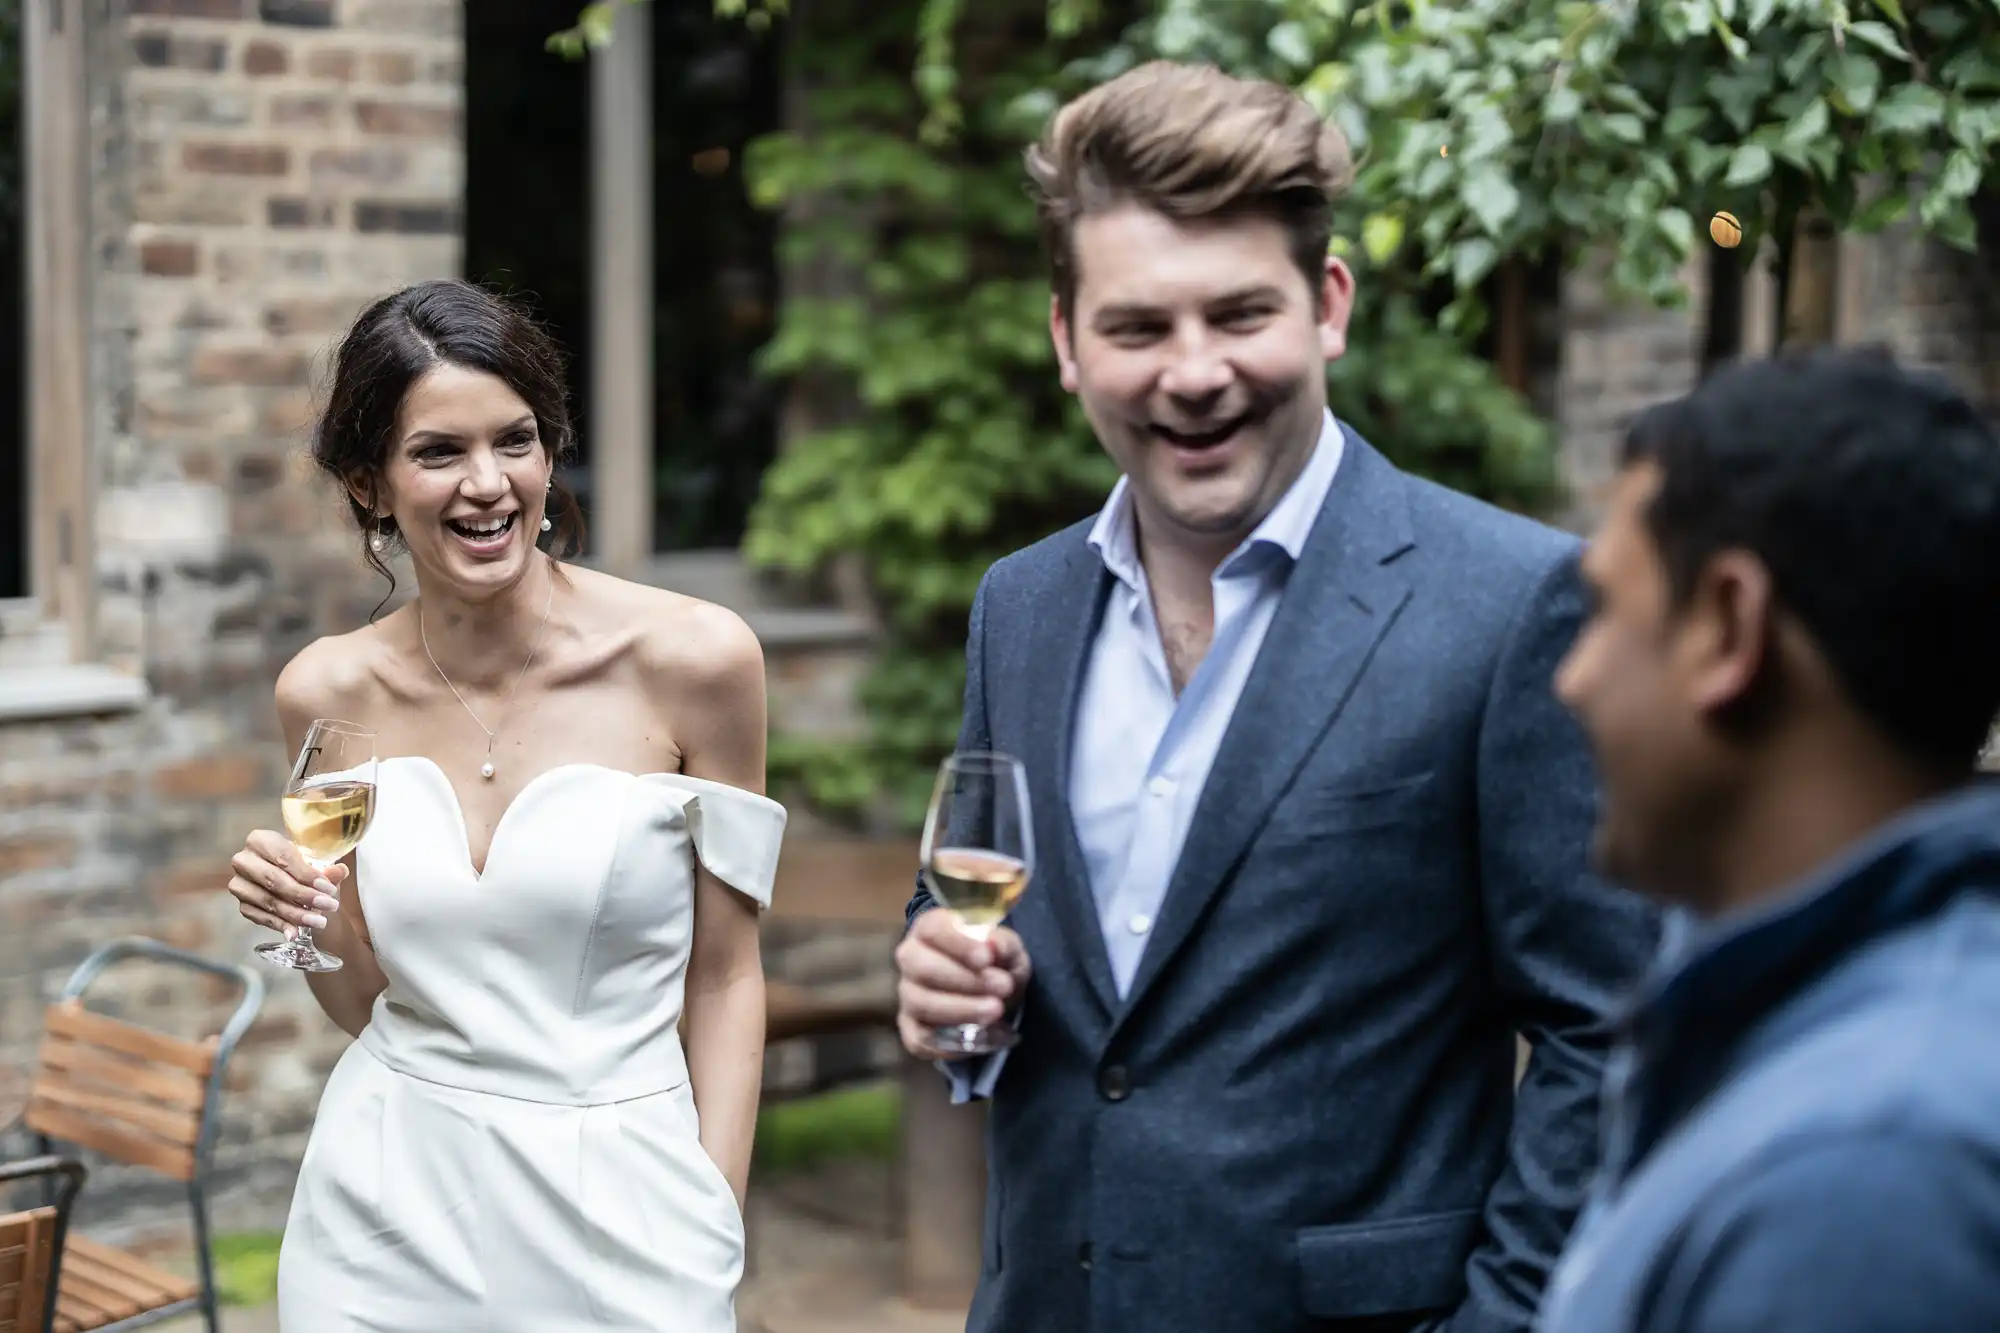 A woman in a white dress and a man in a suit laugh while holding champagne glasses, conversing with a man in a blue shirt at an outdoor gathering.